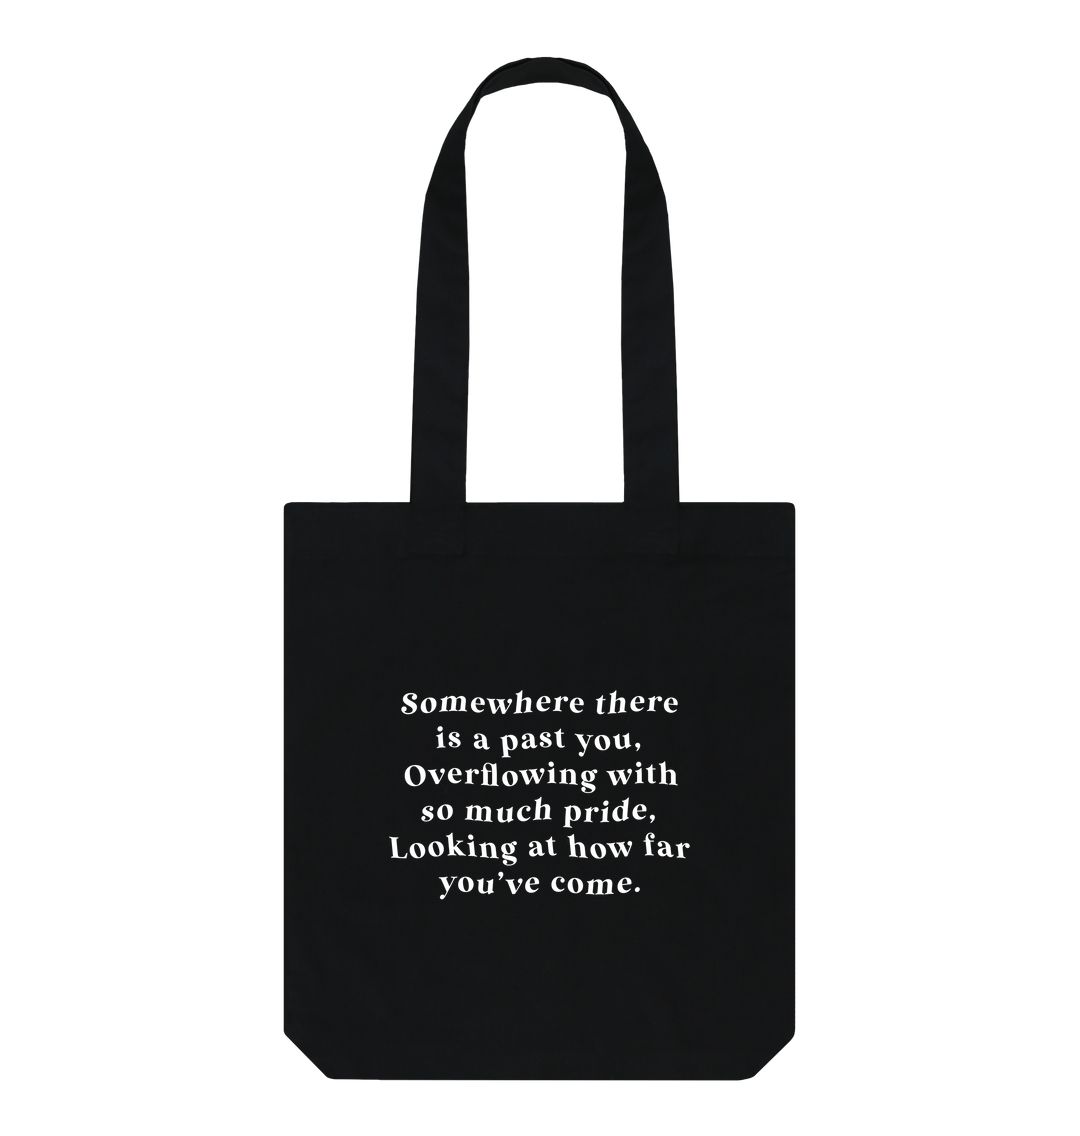 Somewhere there is a Past You Tote Bag - Black